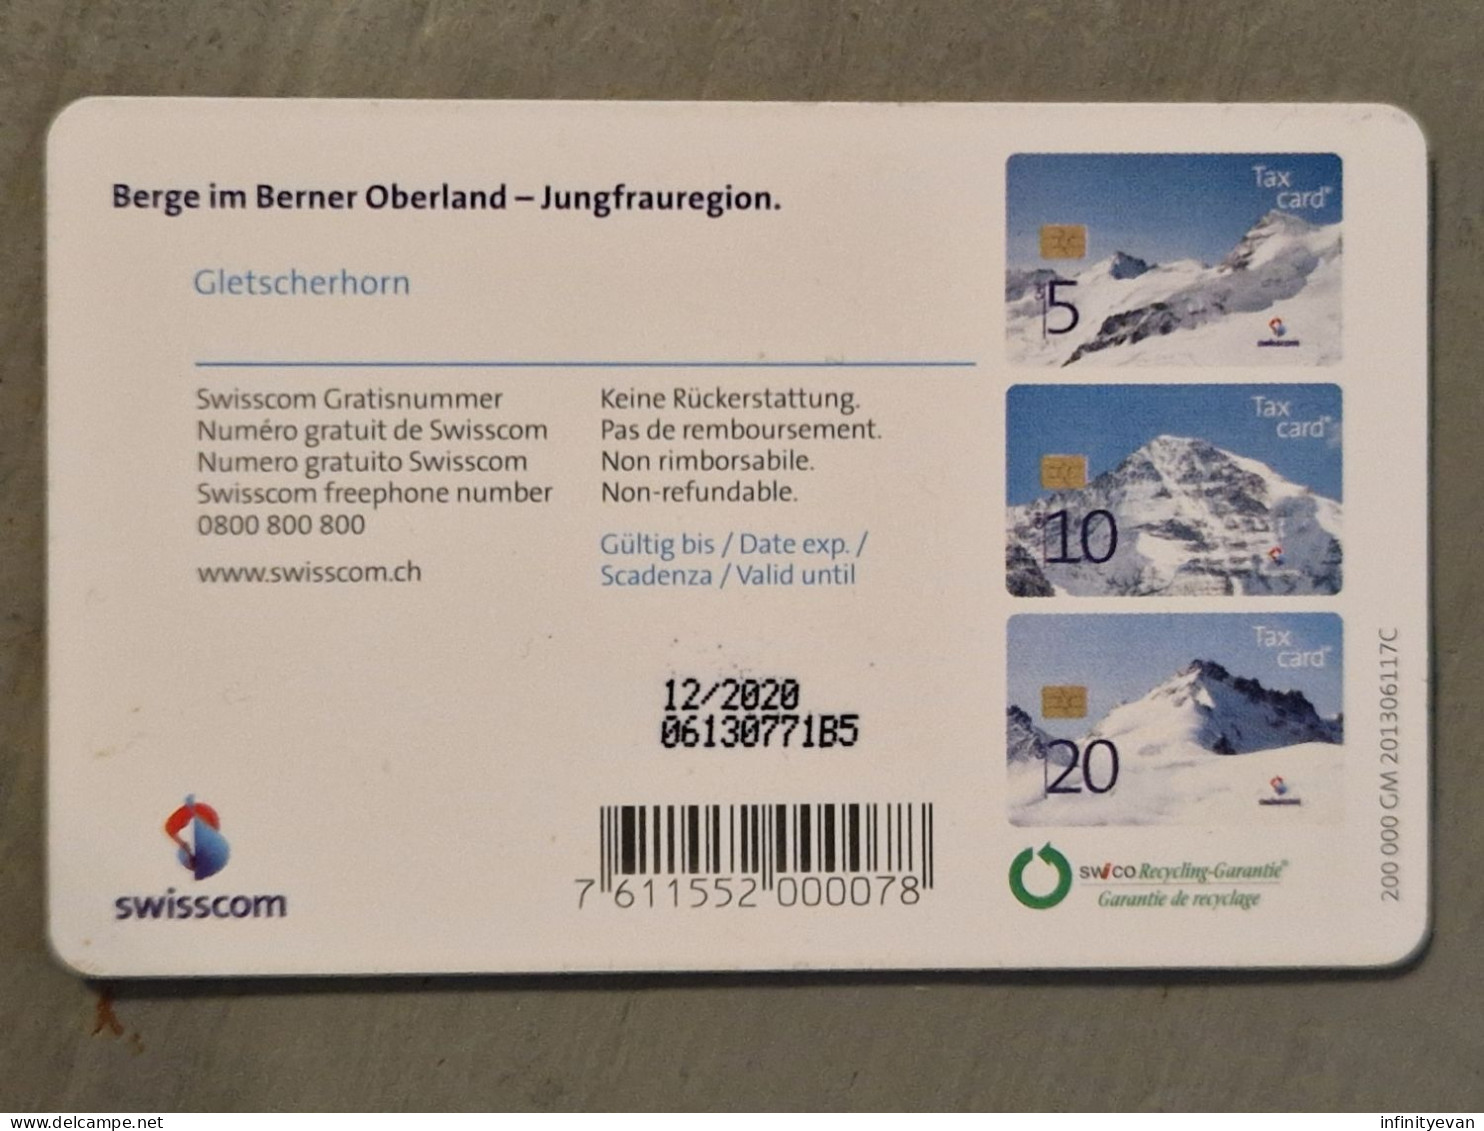 Tax Card 20 CHF MONTAGNE 12/2020 - Suiza